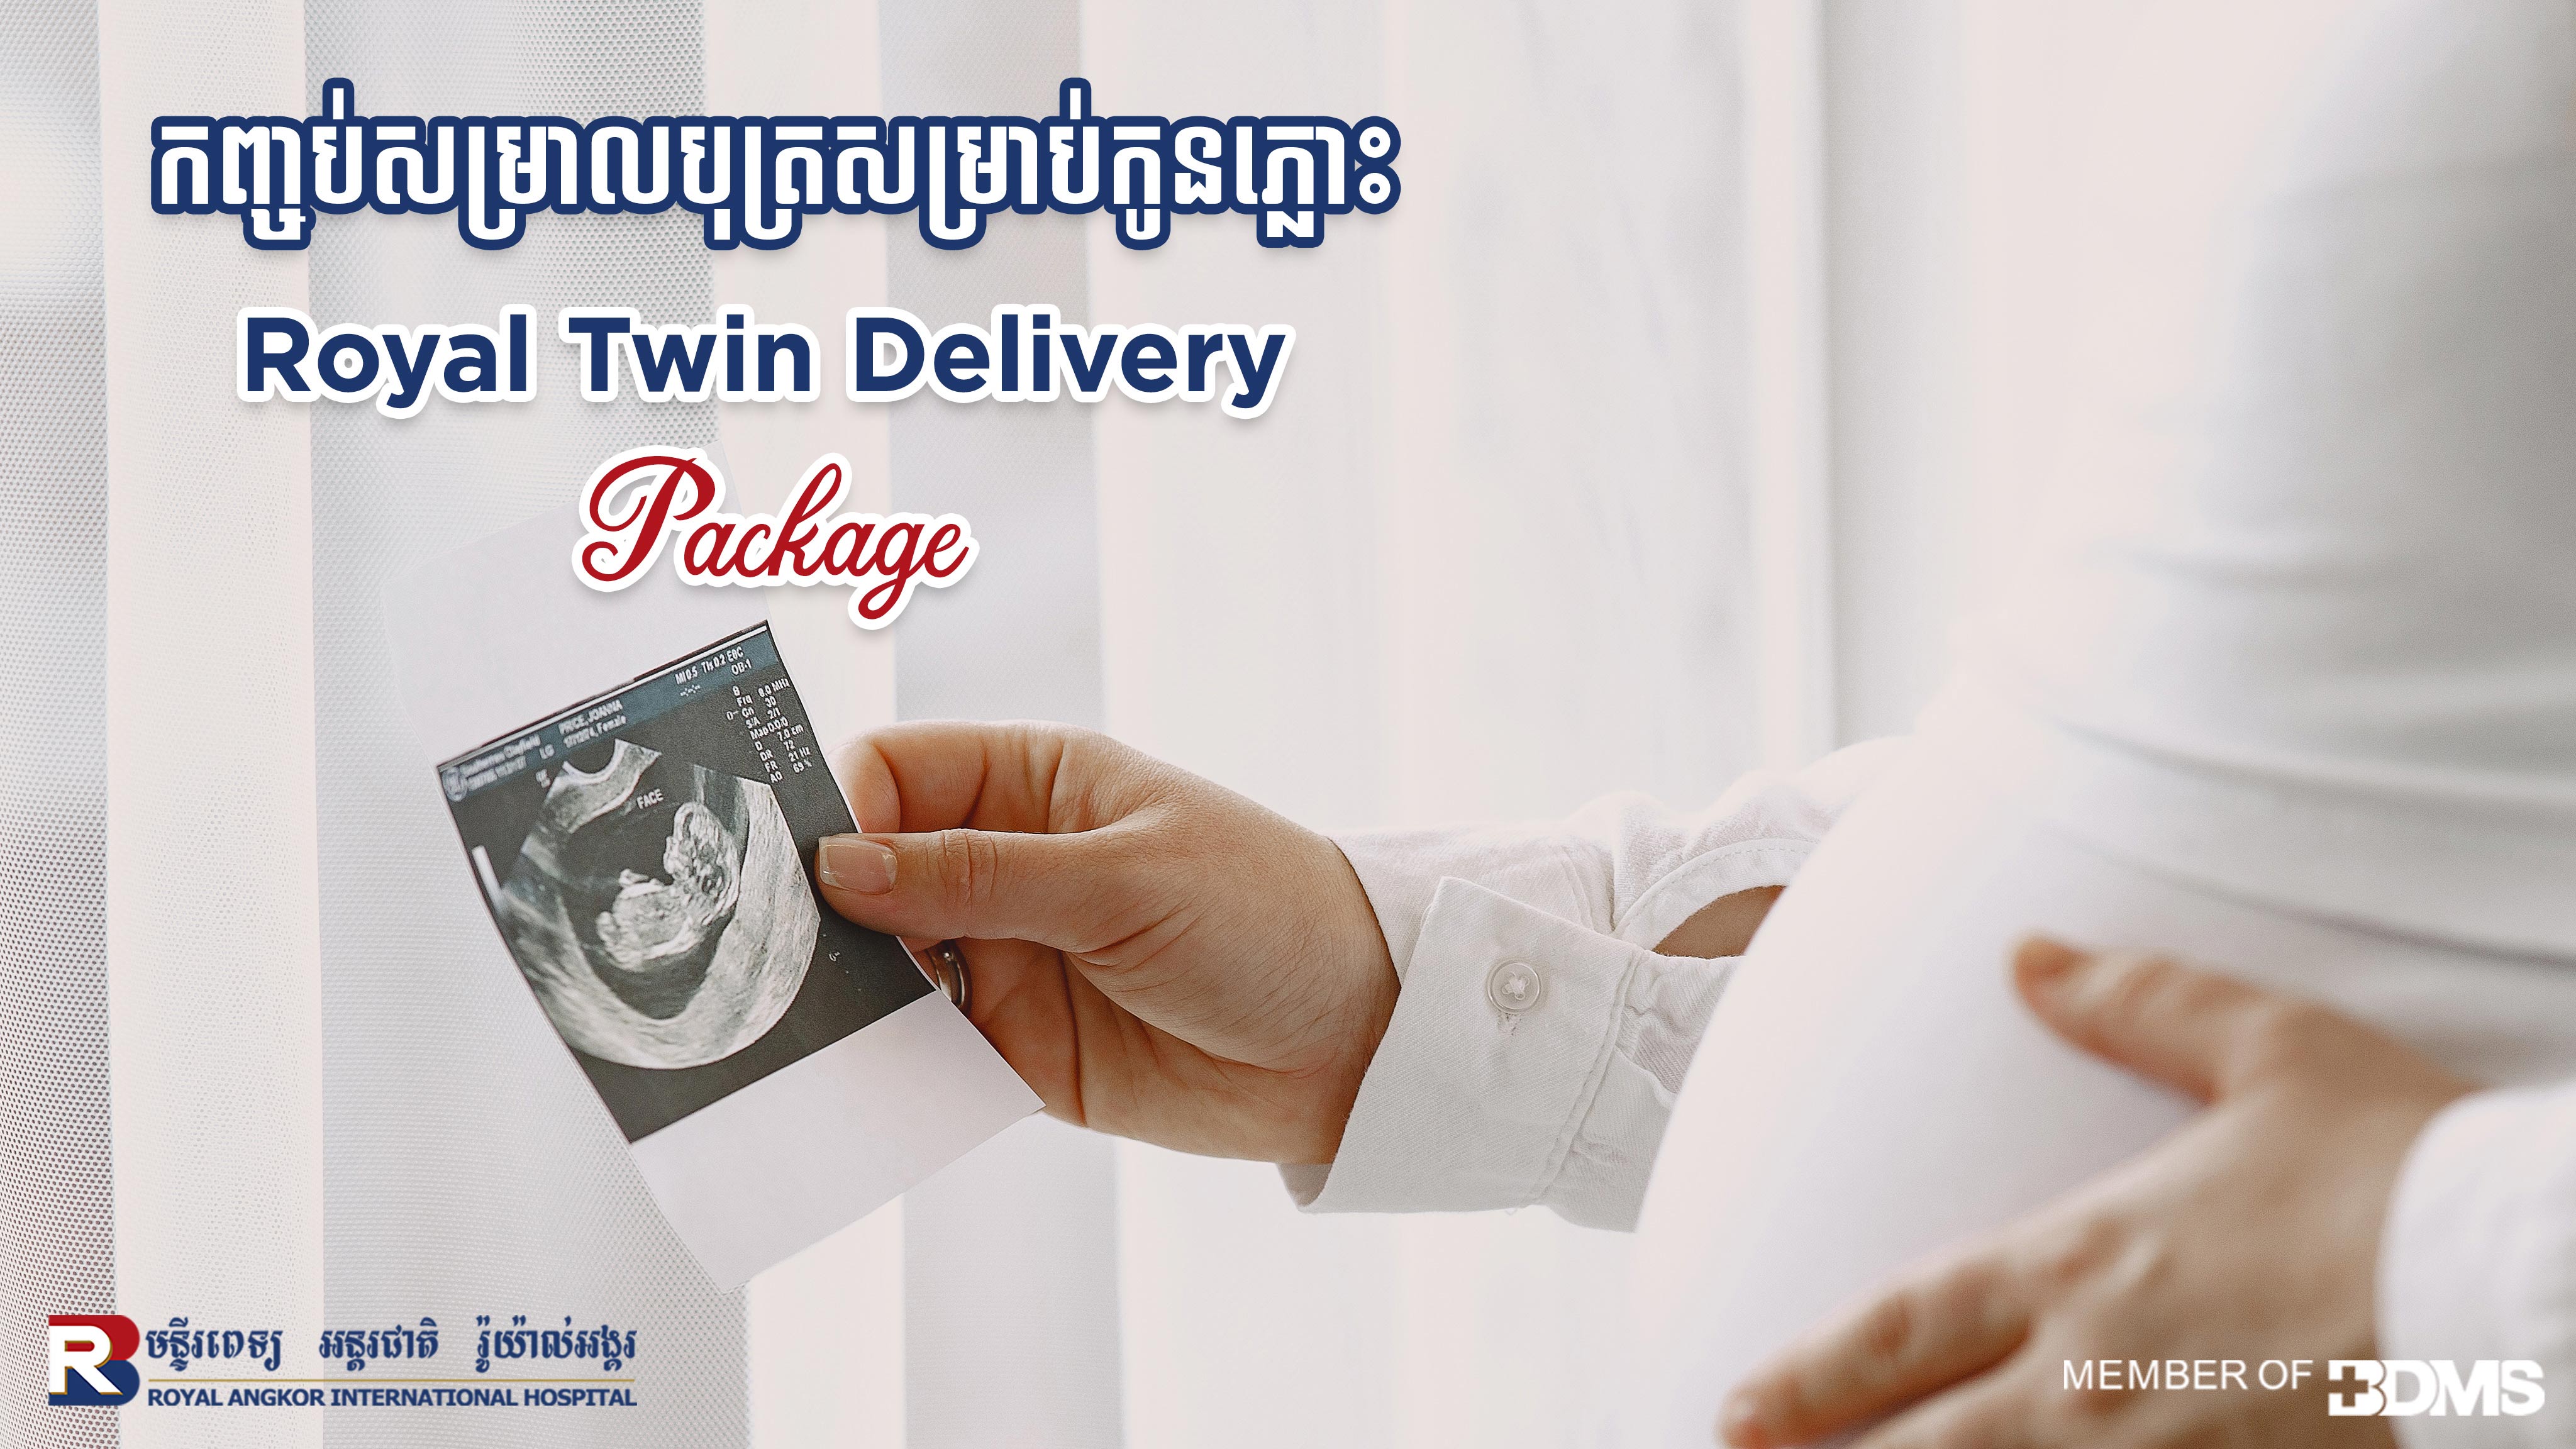 Royal Twin Delivery Package